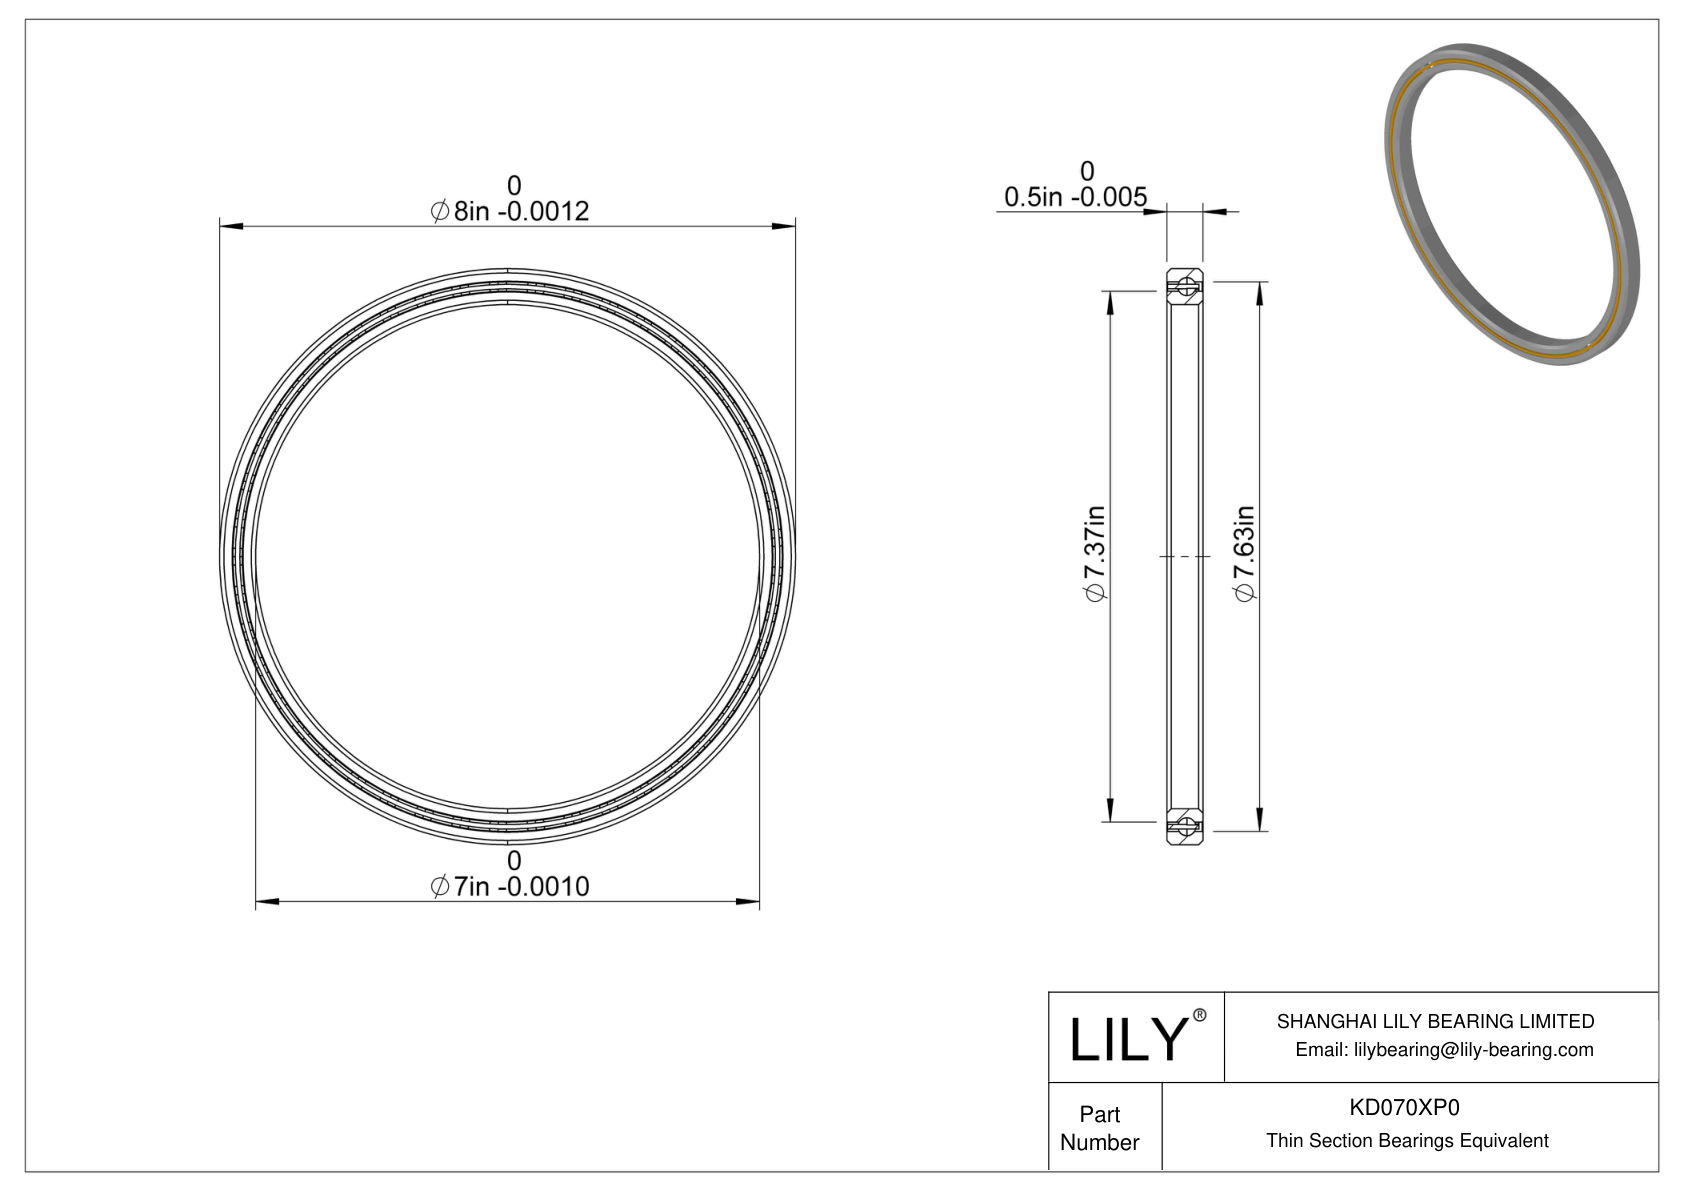 KD070XP0 Constant Section (CS) Bearings cad drawing